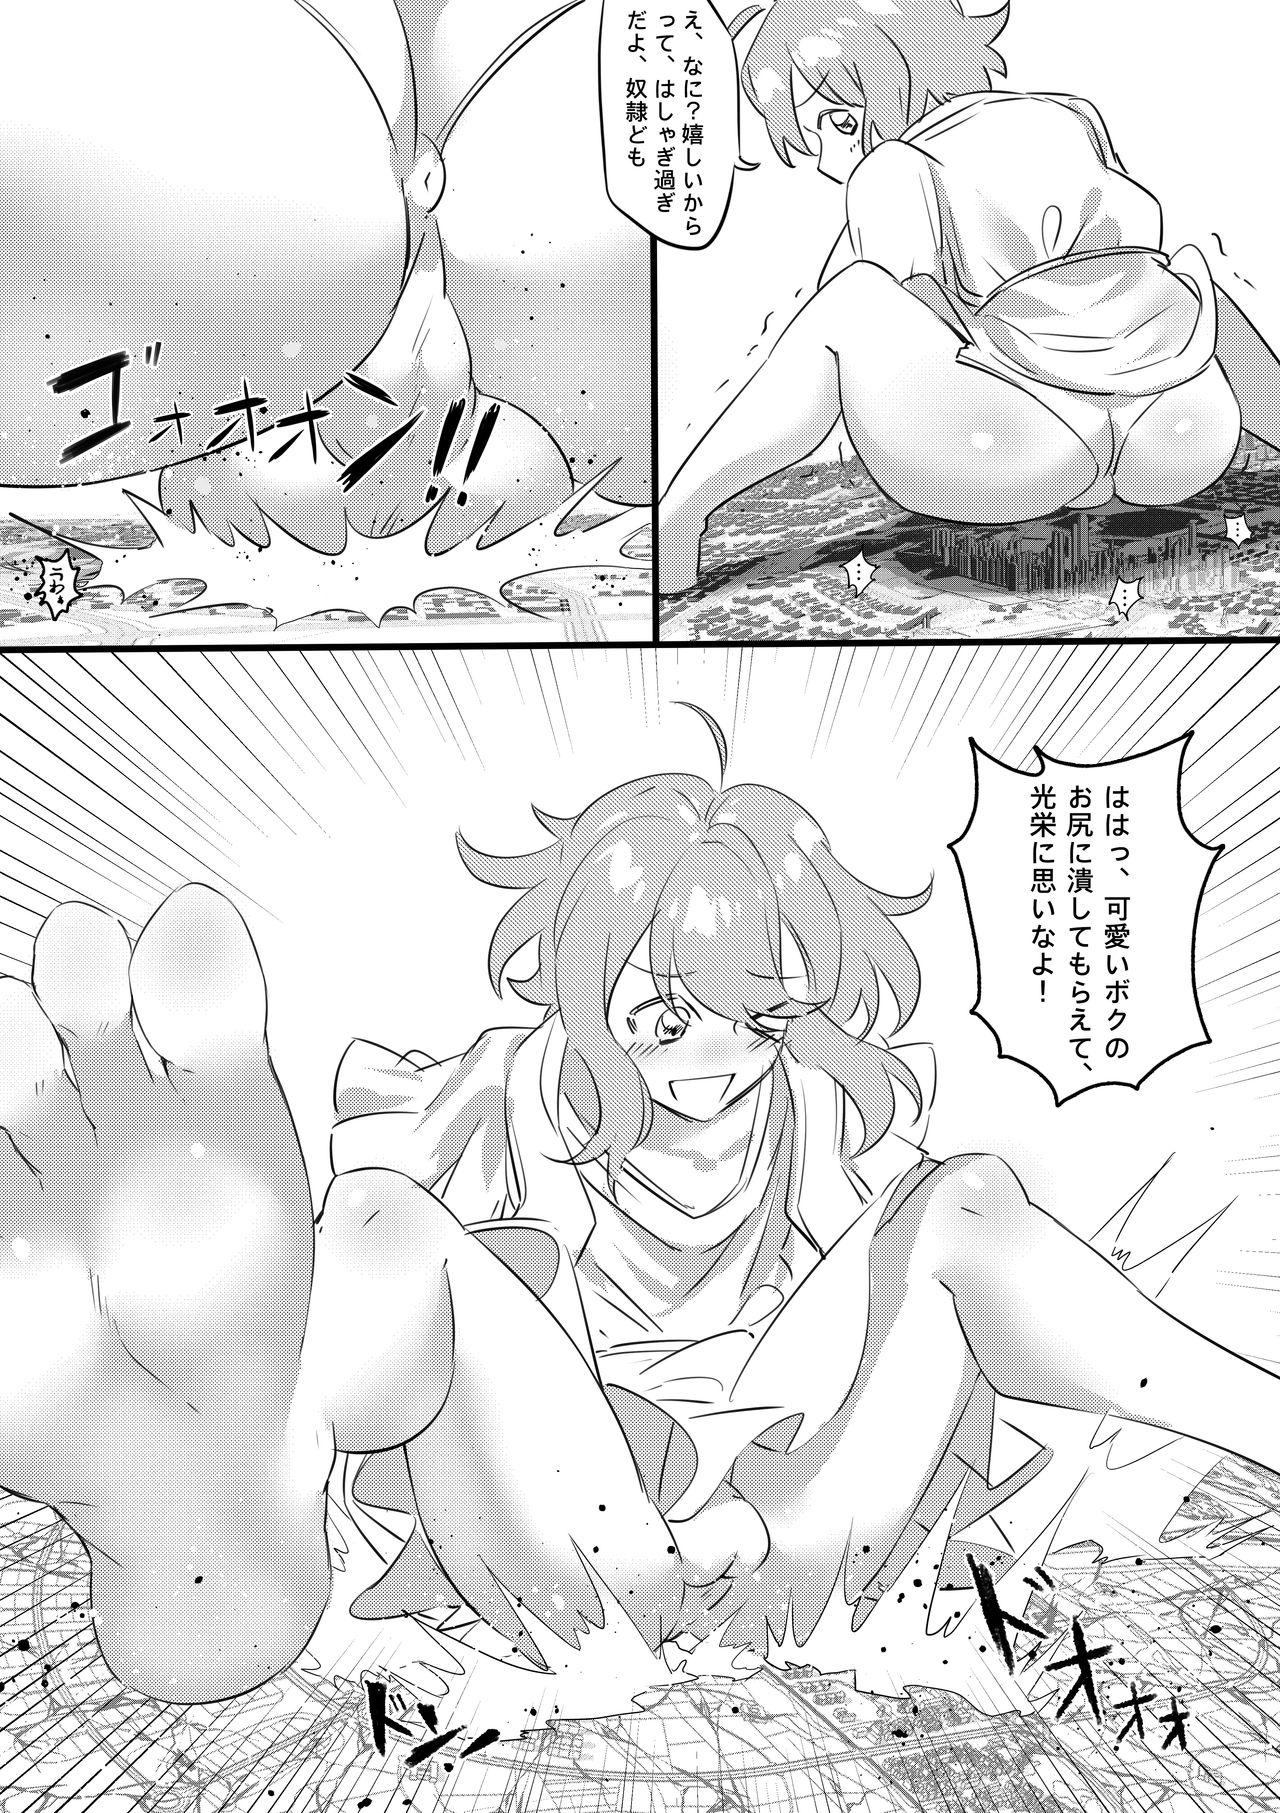 Smooth Angels Turn - Ensemble stars Piercing - Page 9